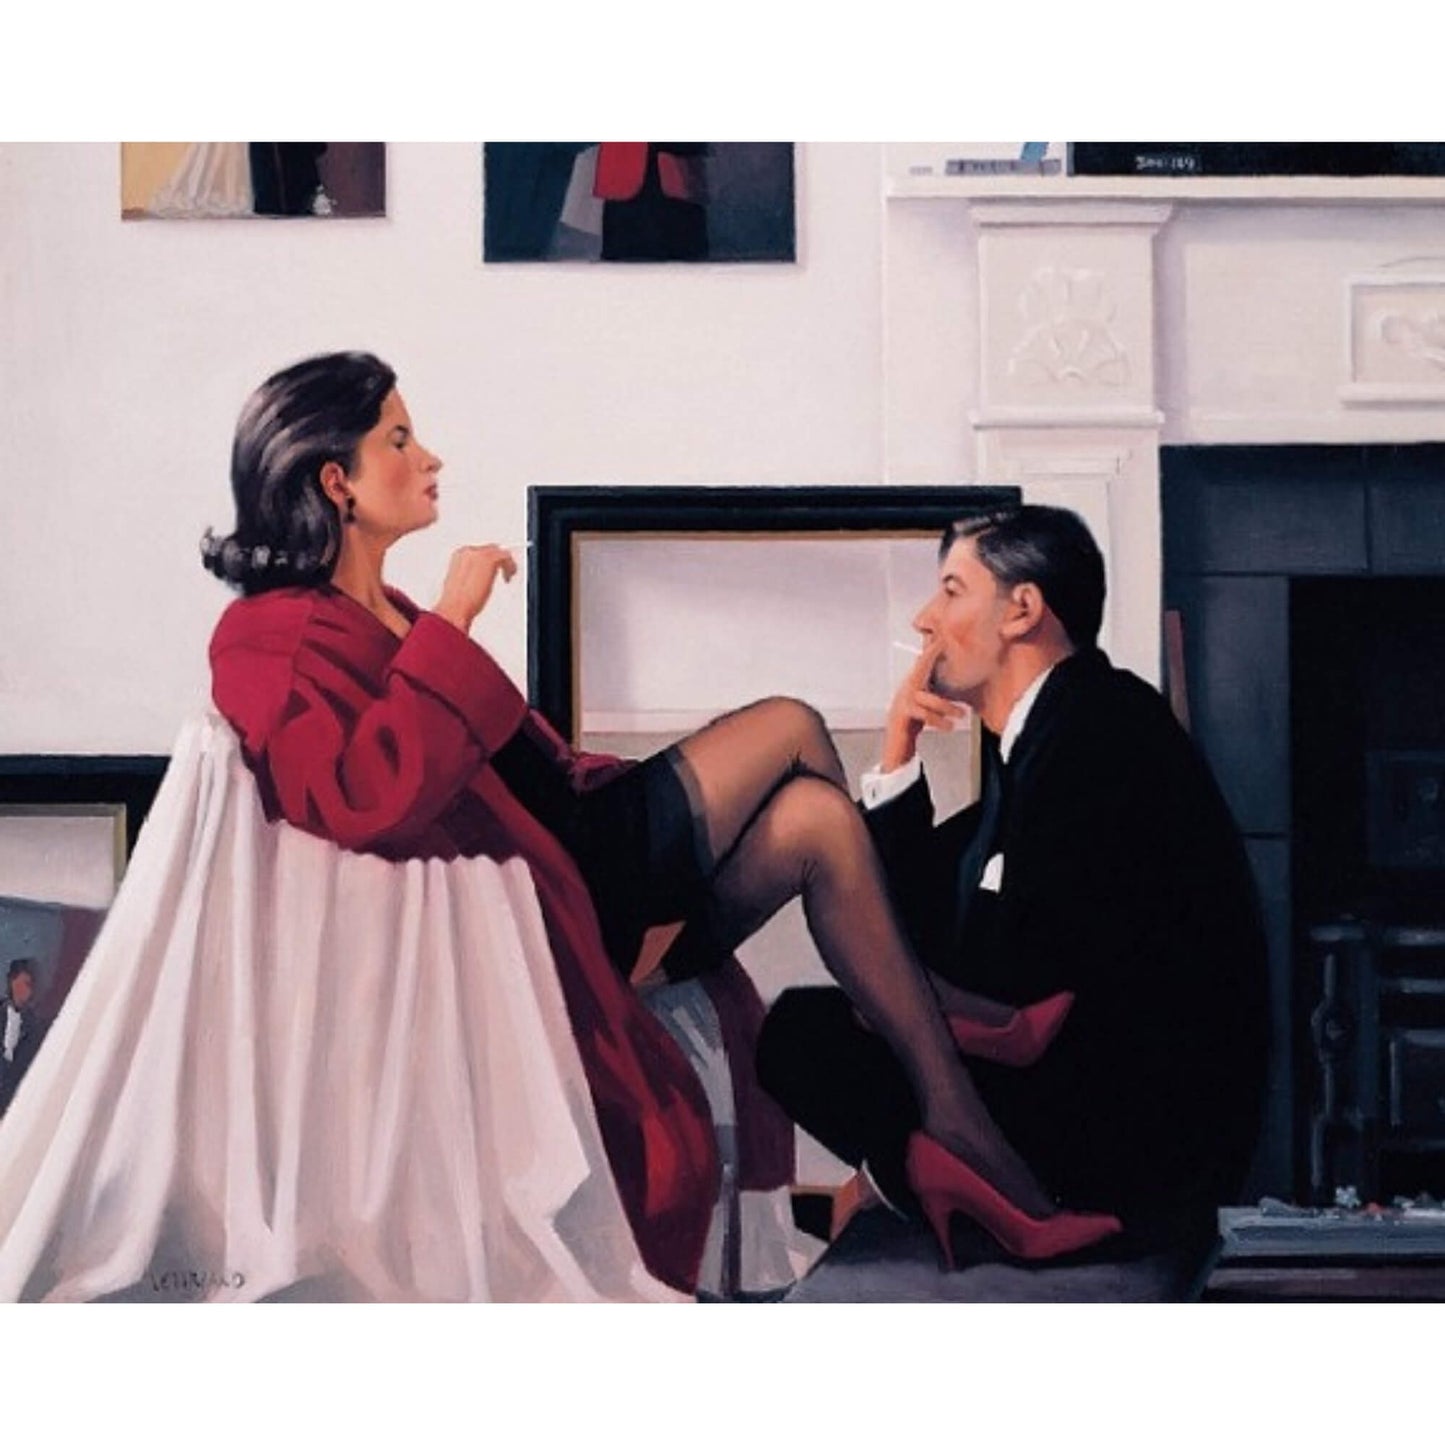 Models In The Studio Limited Edition Print Jack Vettriano